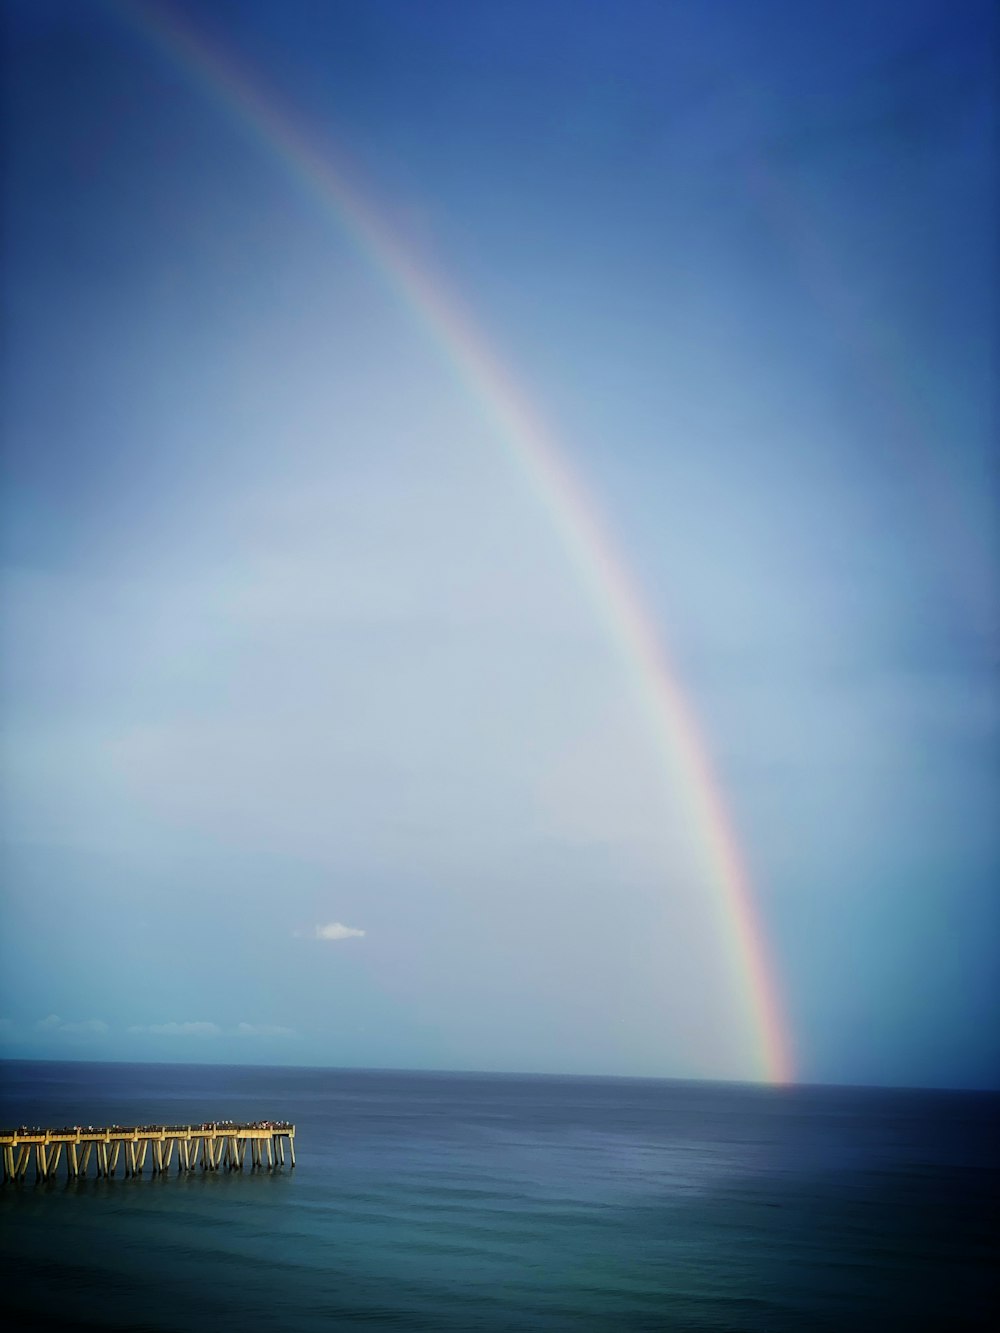 a rainbow in the sky over a body of water